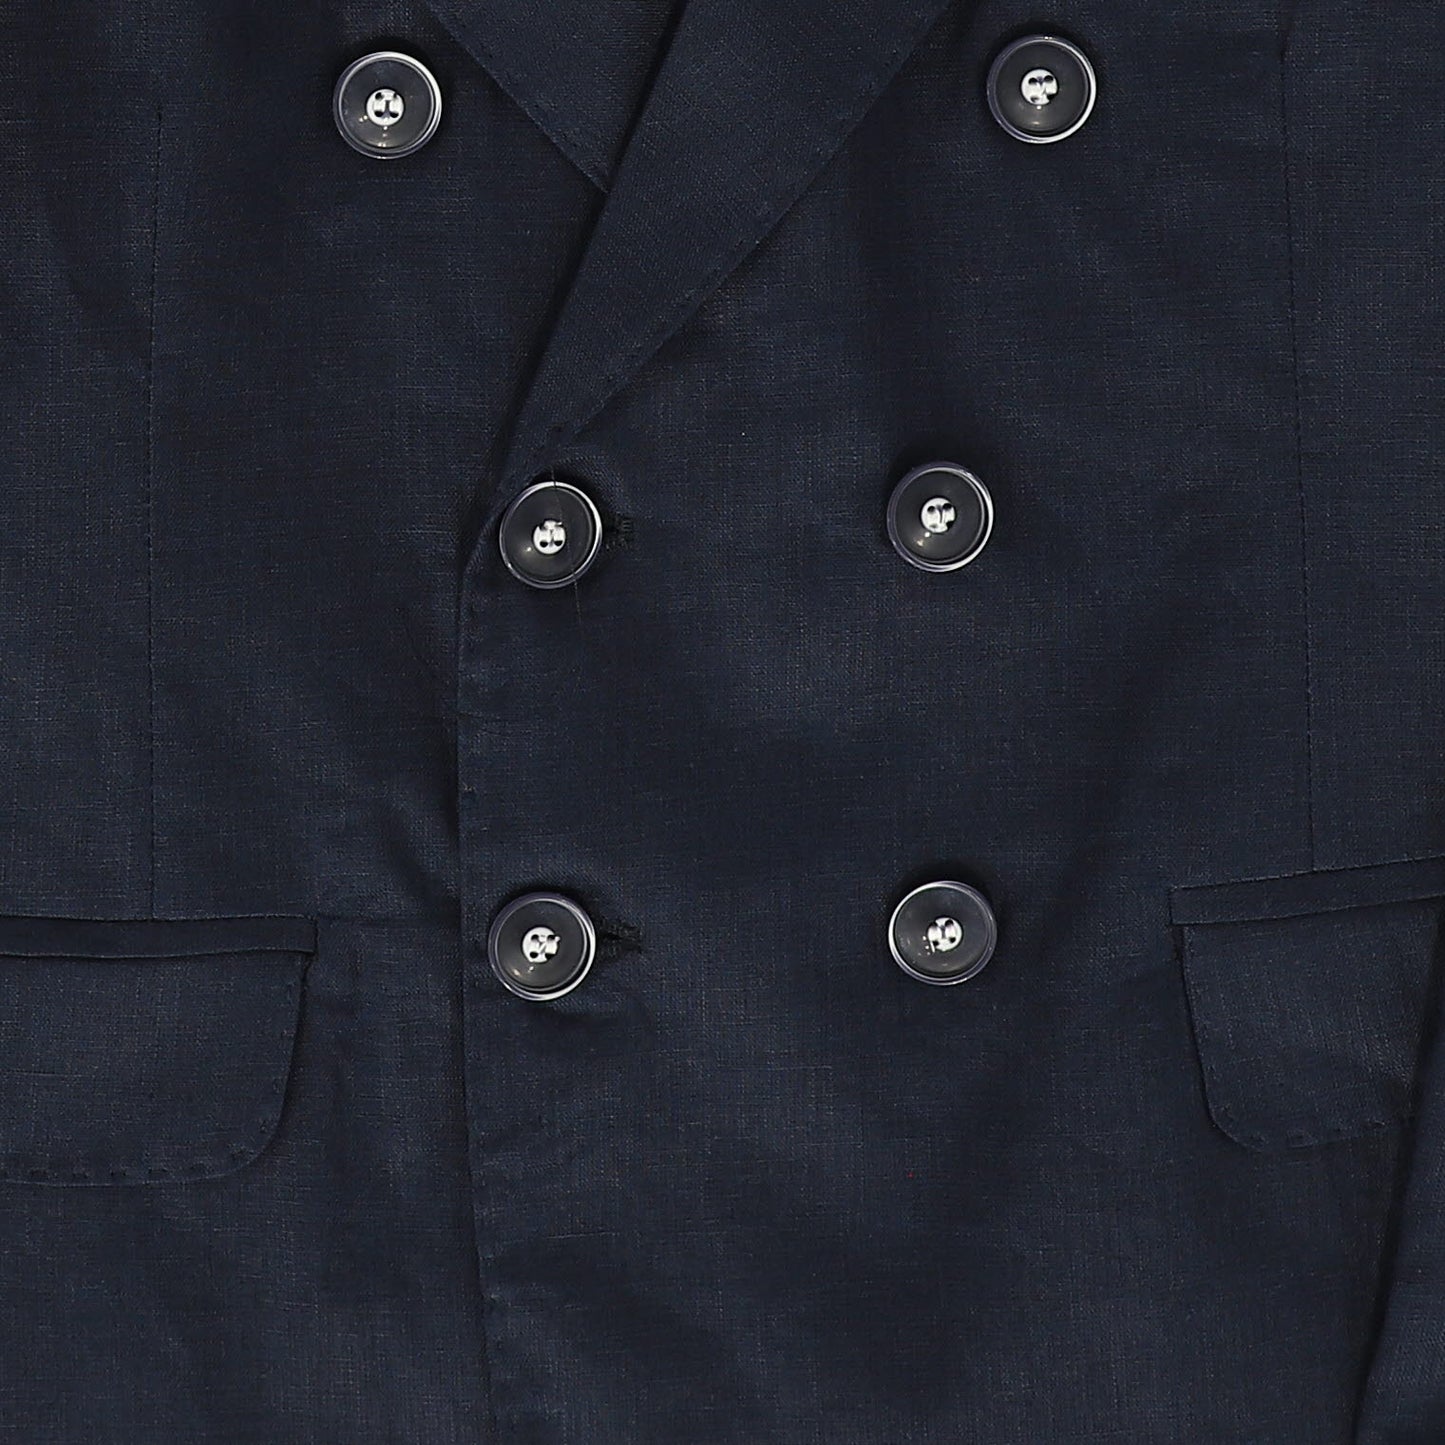 MANUELL & FRANK DARK NAVY DOUBLE BREASTED SUIT [FINAL SALE]